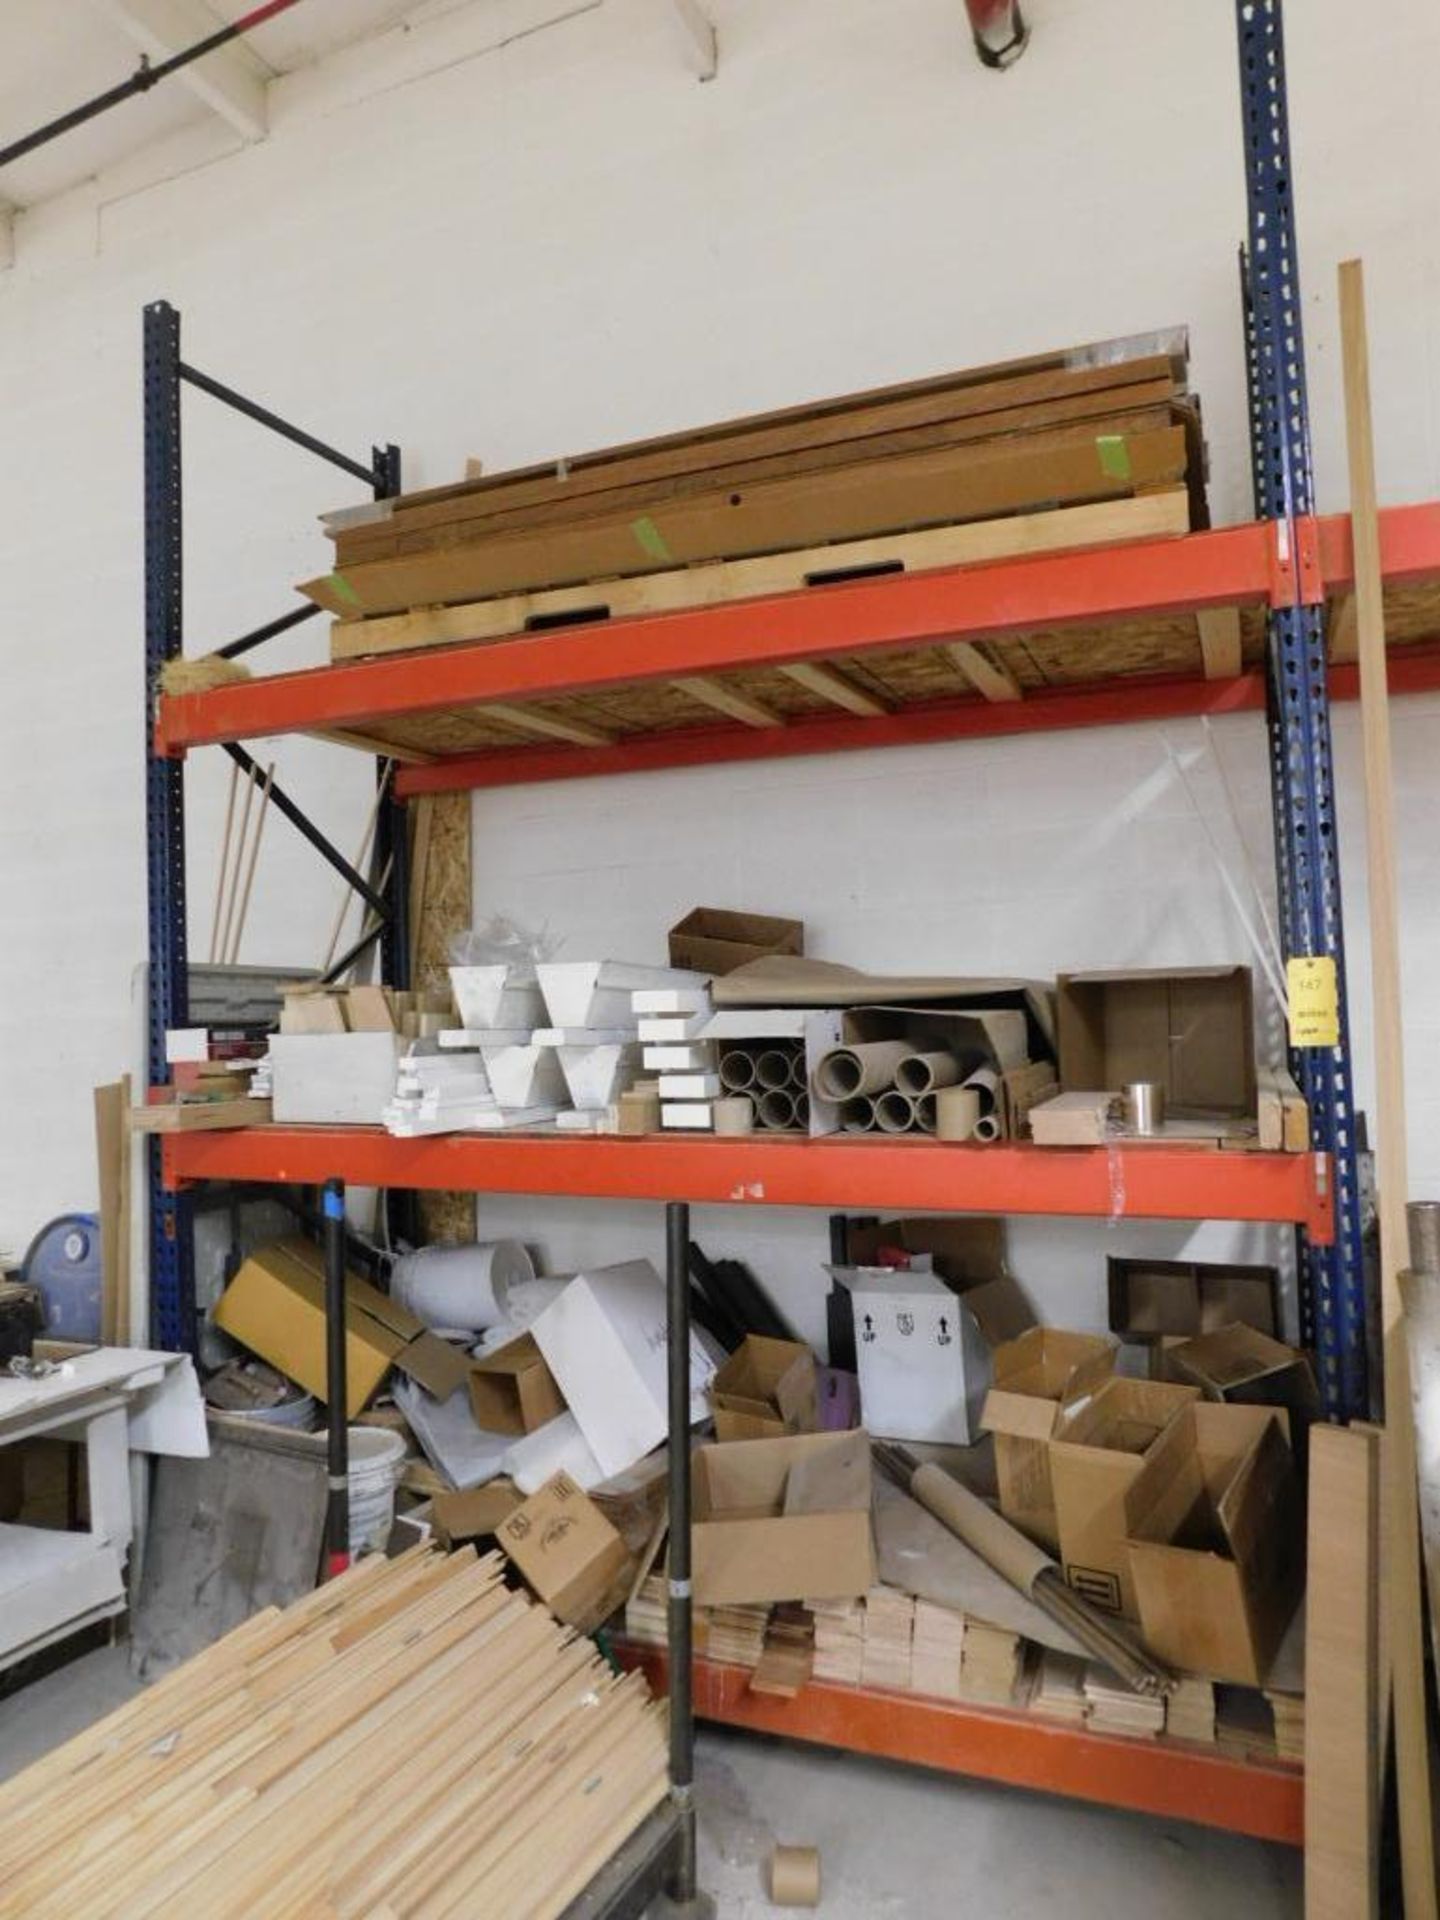 LOT: (3) Sections Pallet Rack, 12' x 9' x 42" w/Contents of Galvanized Tub, Saw Horses, Packing Supp - Image 2 of 5